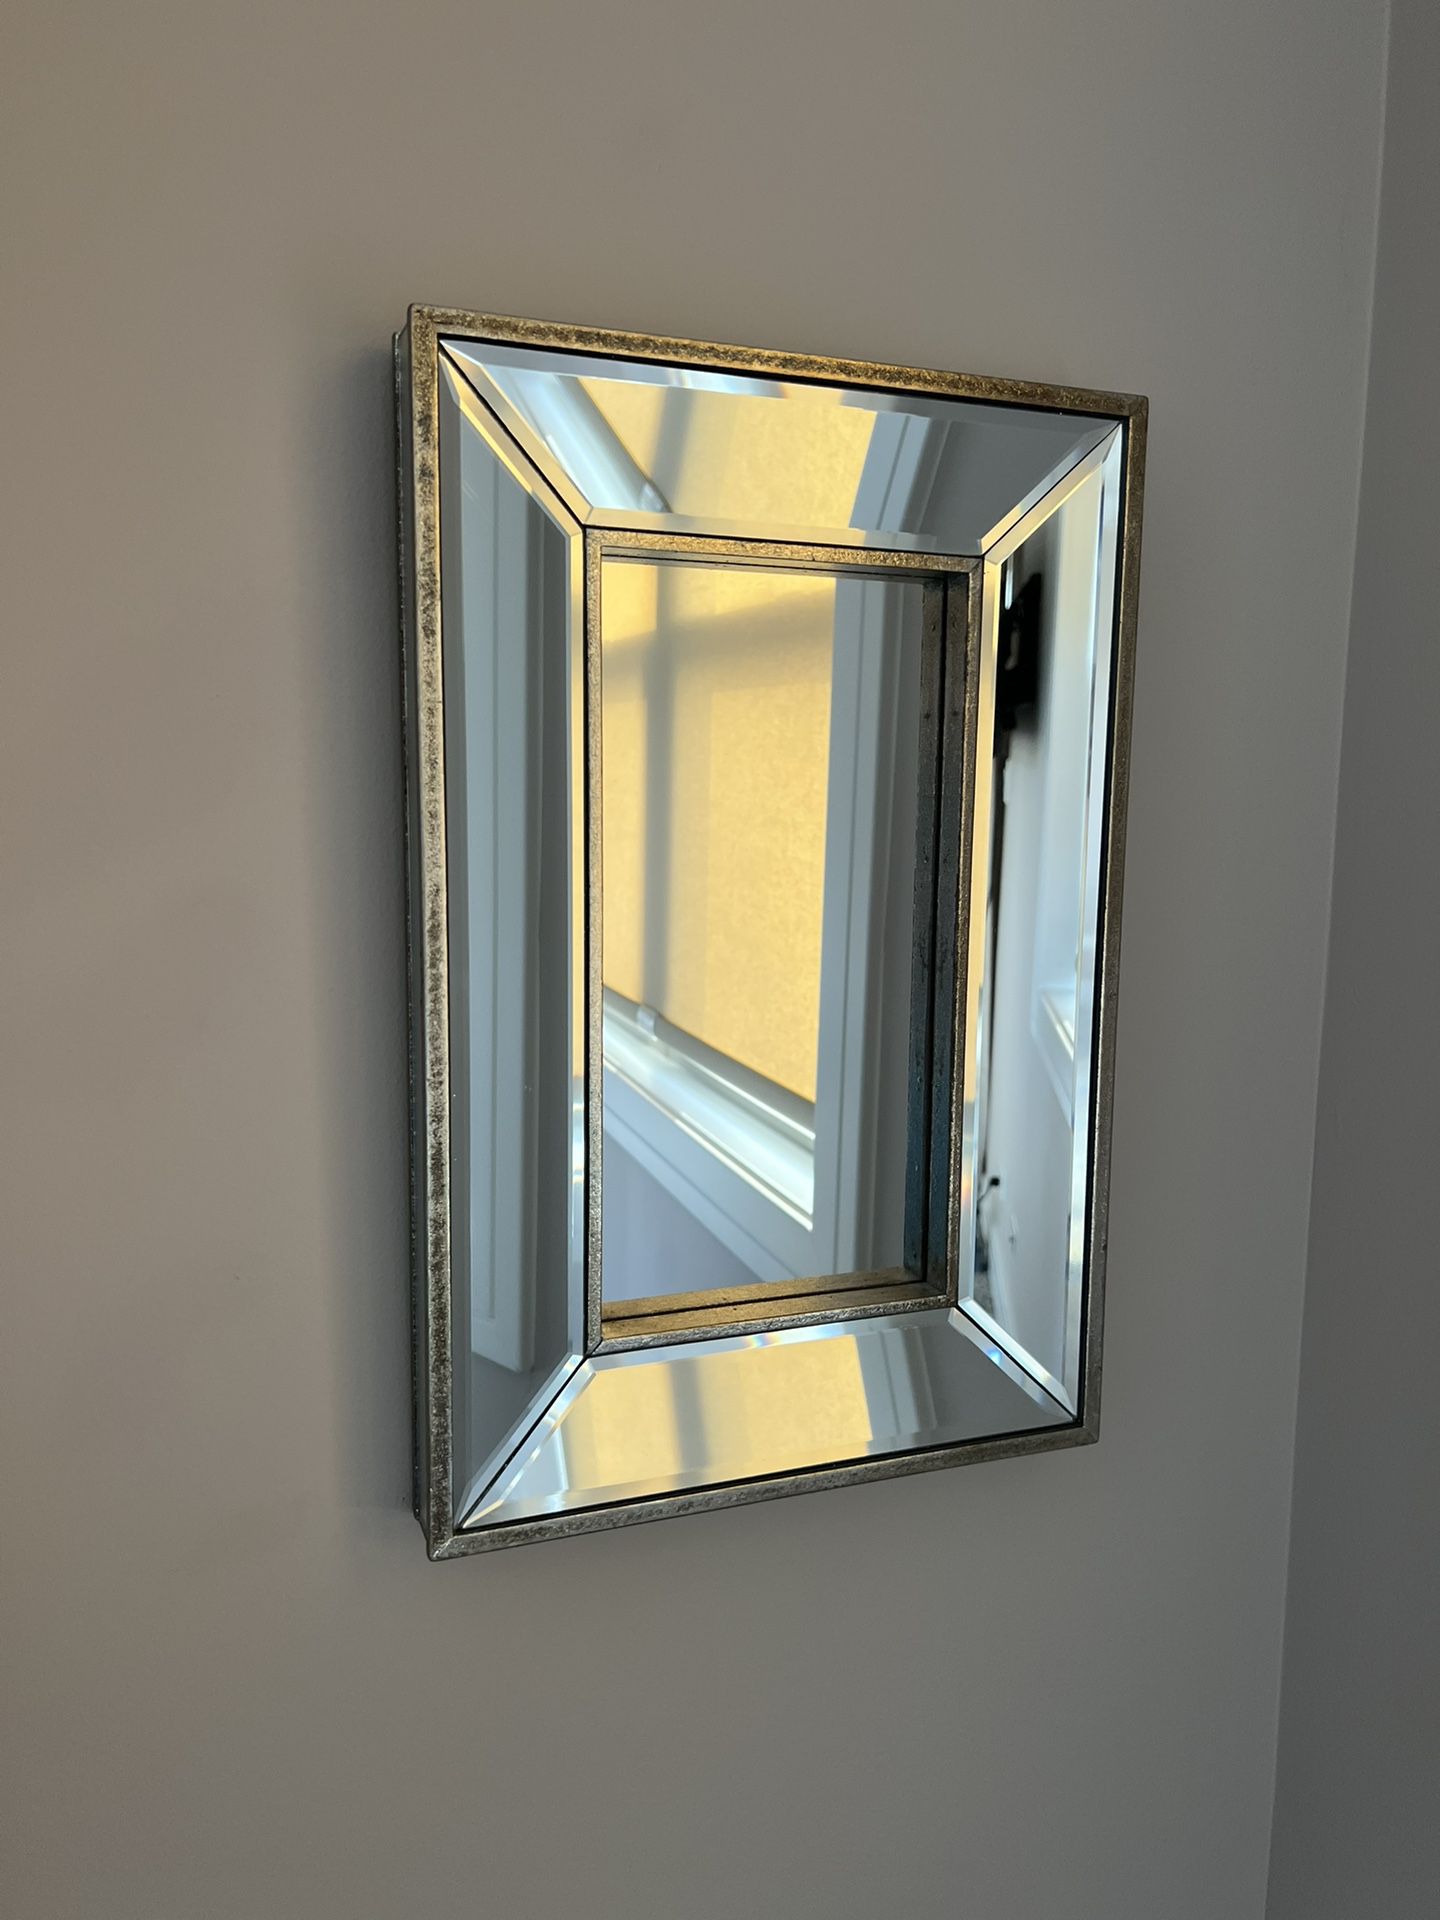 2 NEW MIRRORS 18”x12” TOP QUALITY 